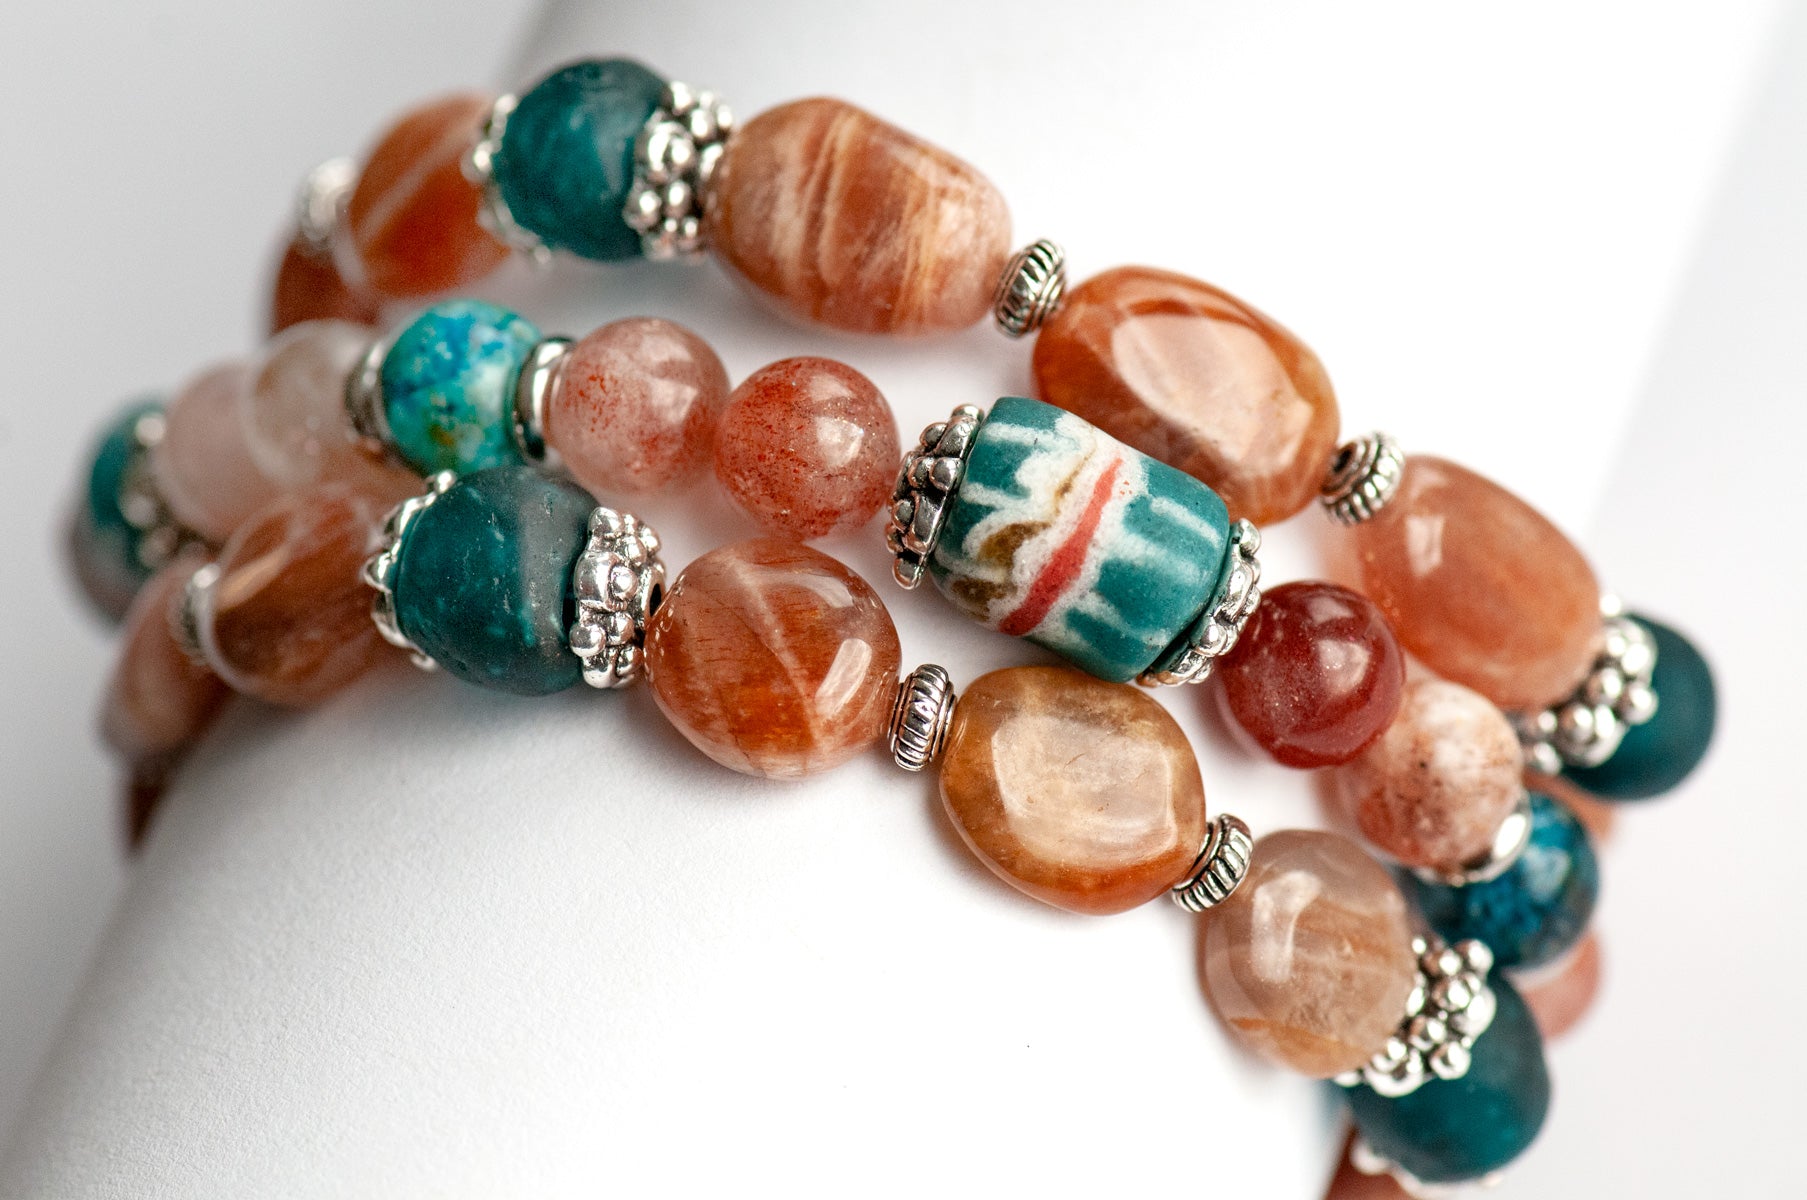 Sunstone and Shattuckite bracelet set with recycled glass beads handmade in Canada